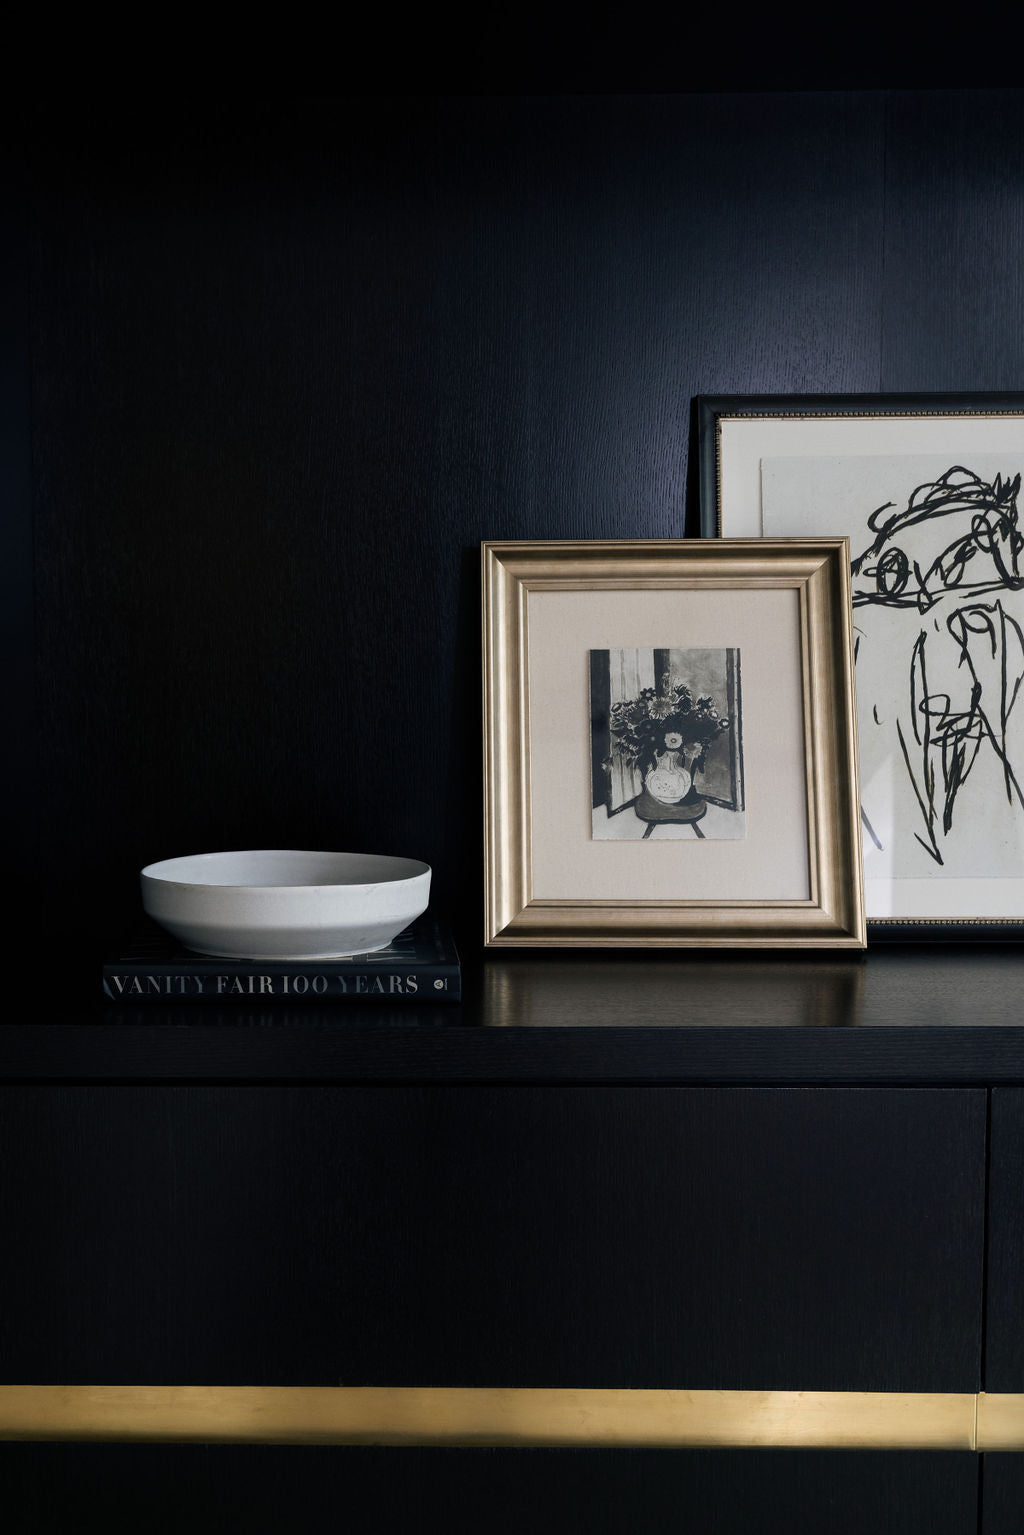 10 Simple Ways to Refresh Your Home in the New Year - Reframe Old Art